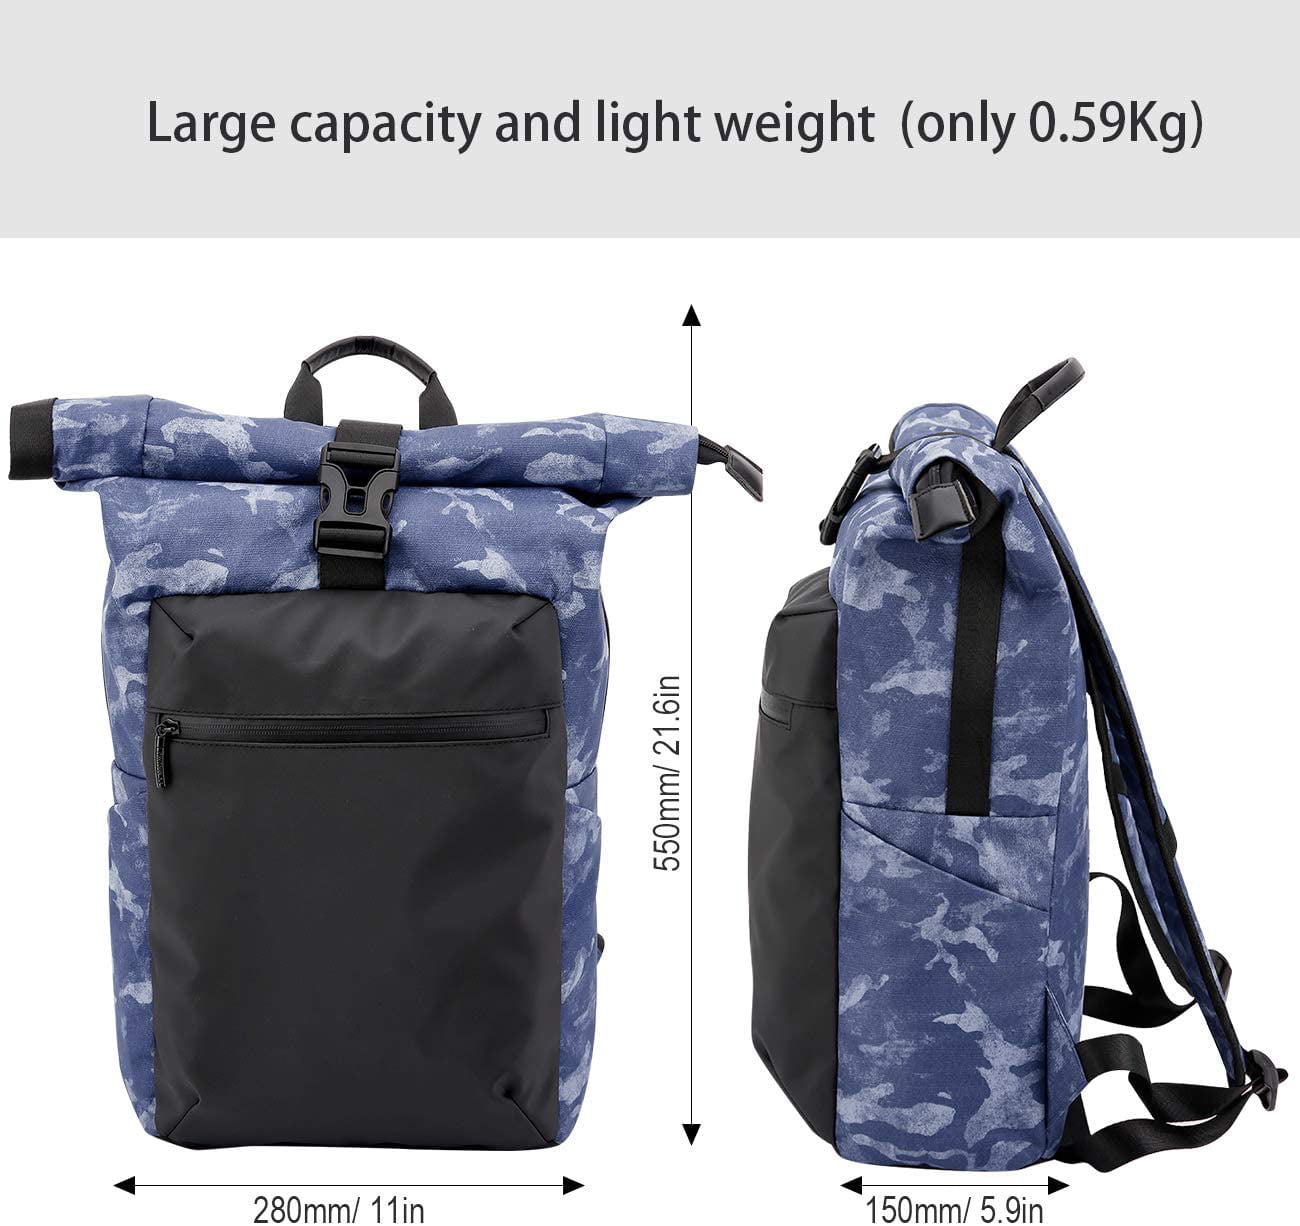 ERAY Roll Top Backpack Waterproof Casual Daypack Lightweight Outdoor Hiking Travel Backpack Day Pack for Women Men Blue